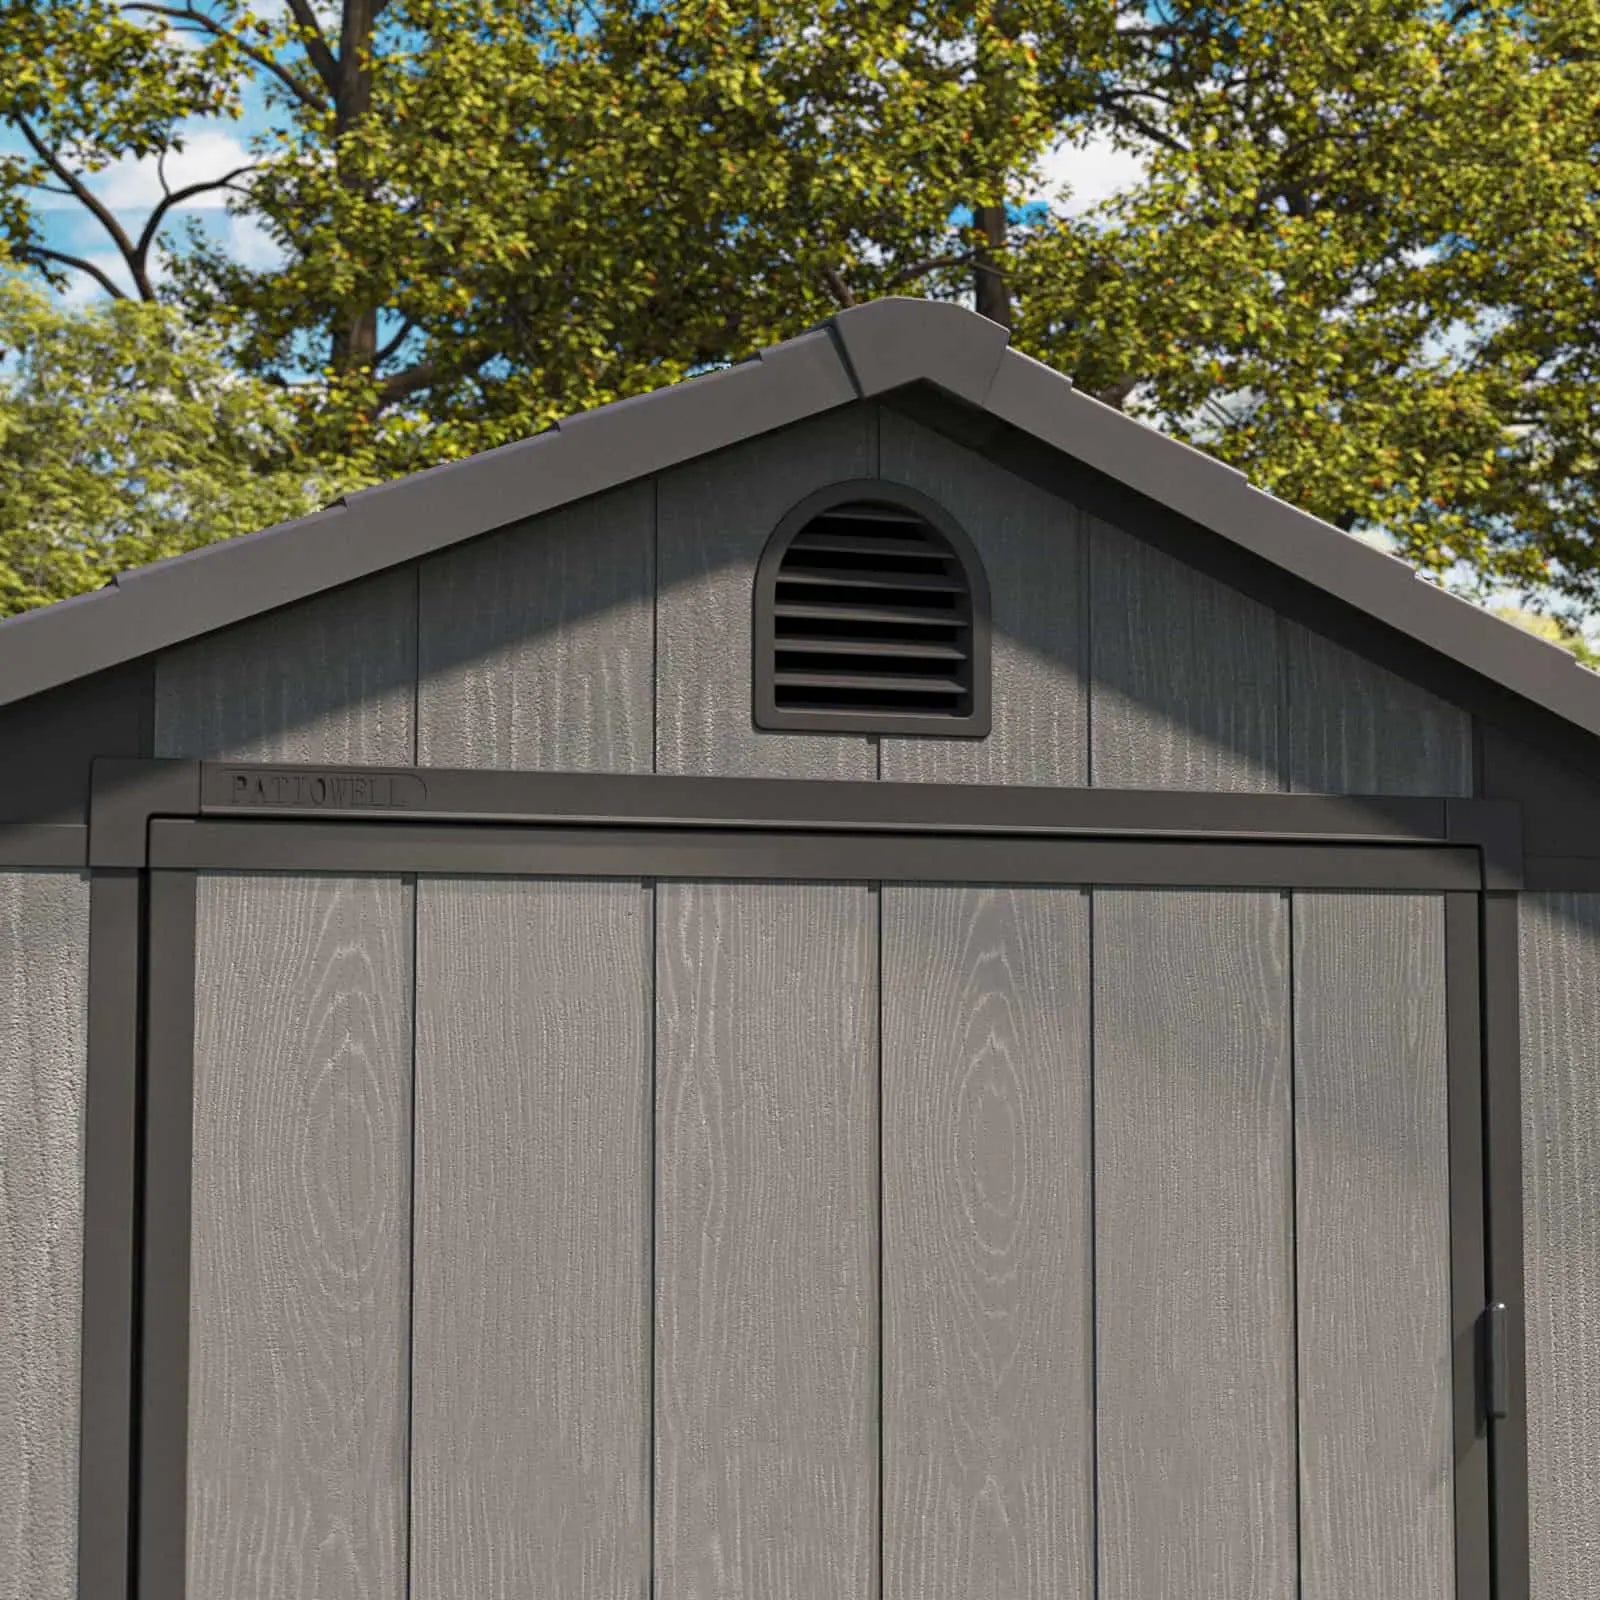 Patiowell 4x4 Plastic Storage Shed Pro-Air Vents